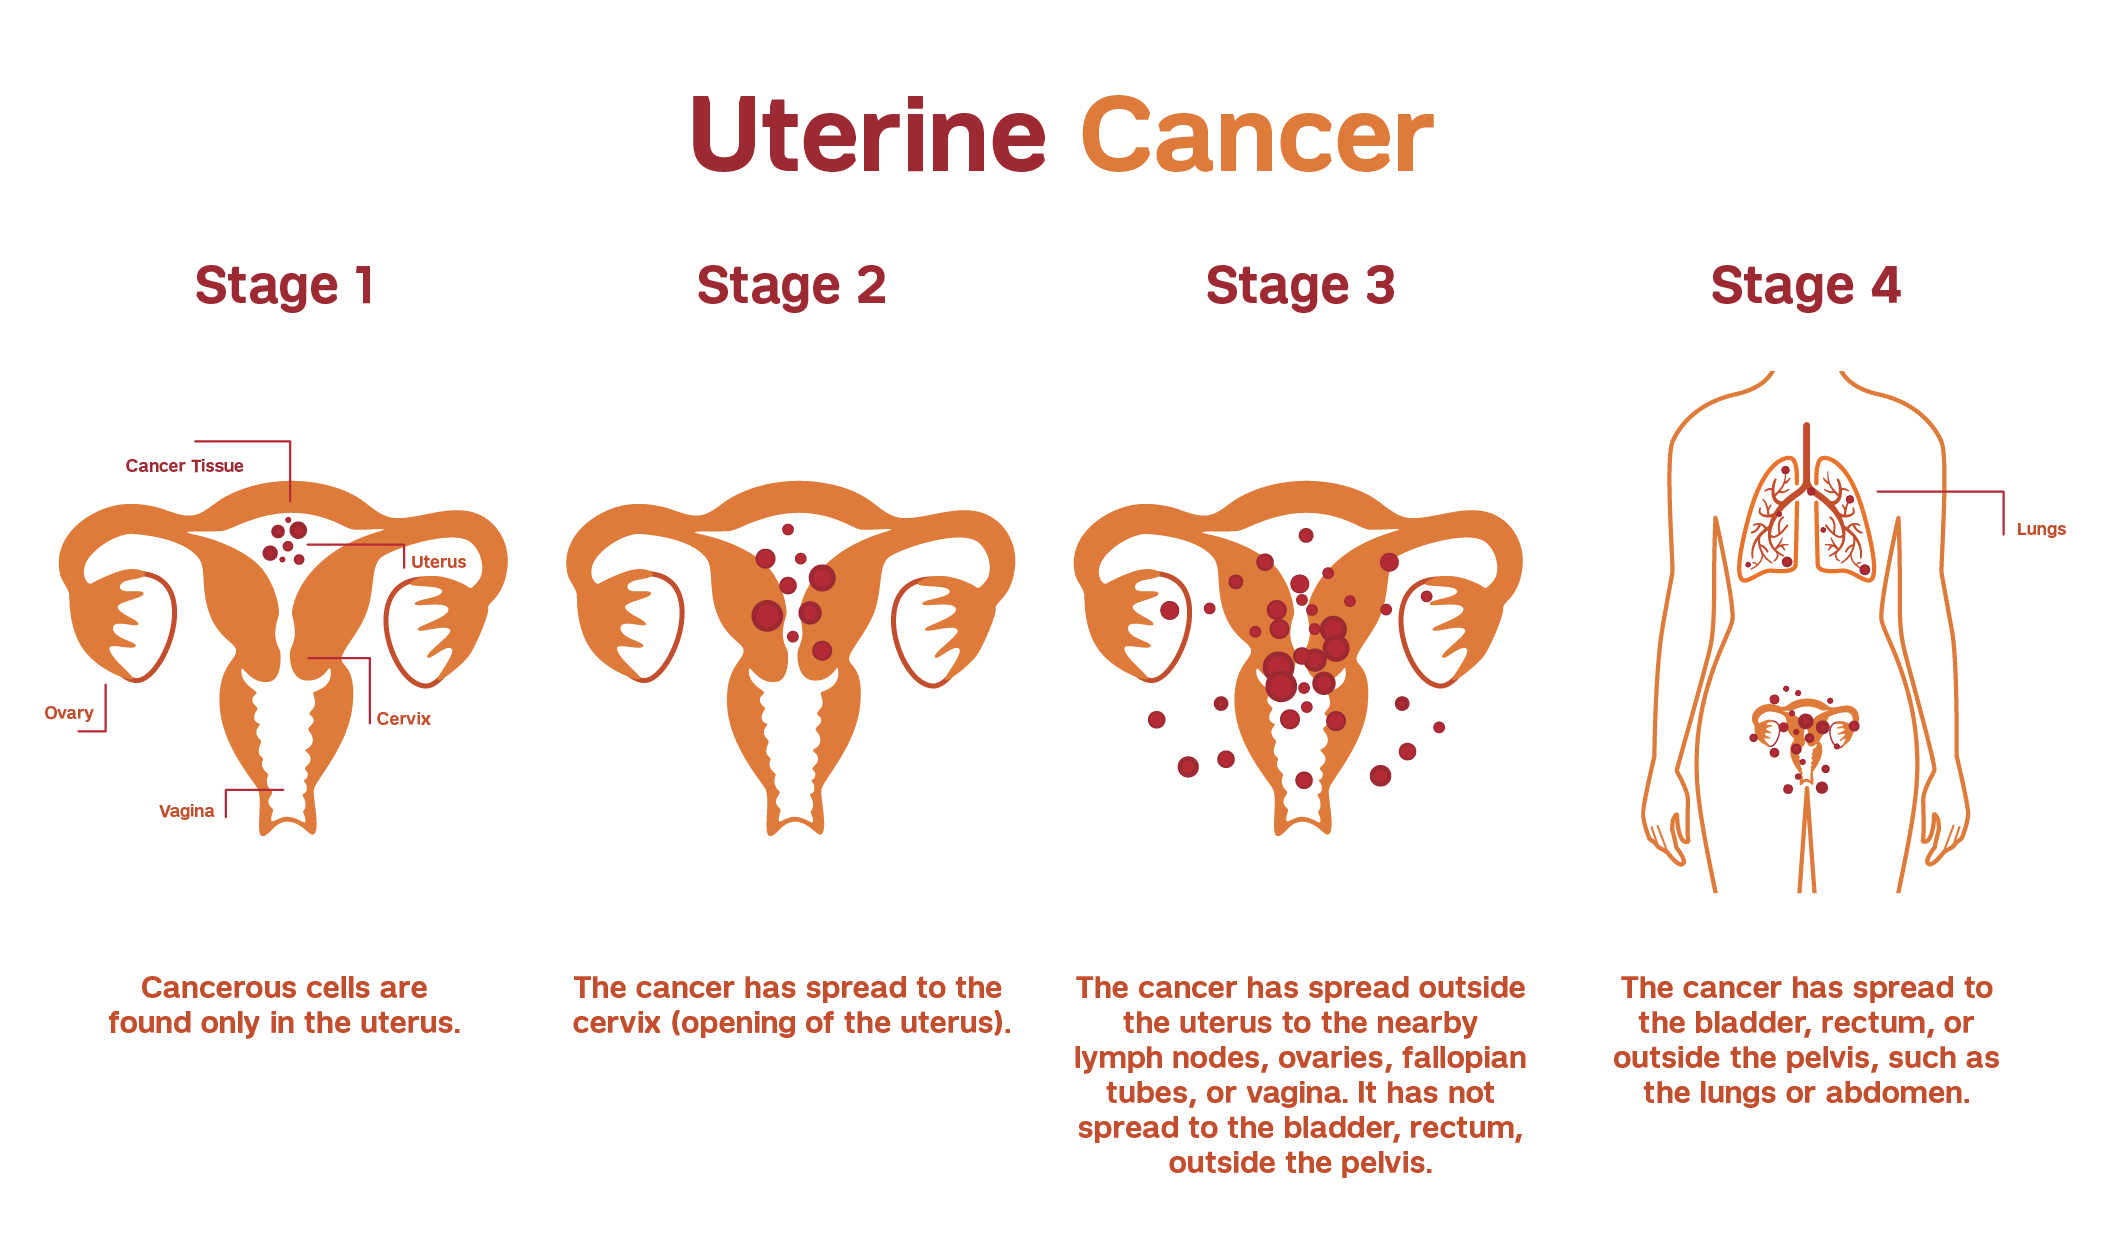 Illustration explaining the staging of endometrial and uterine cancers